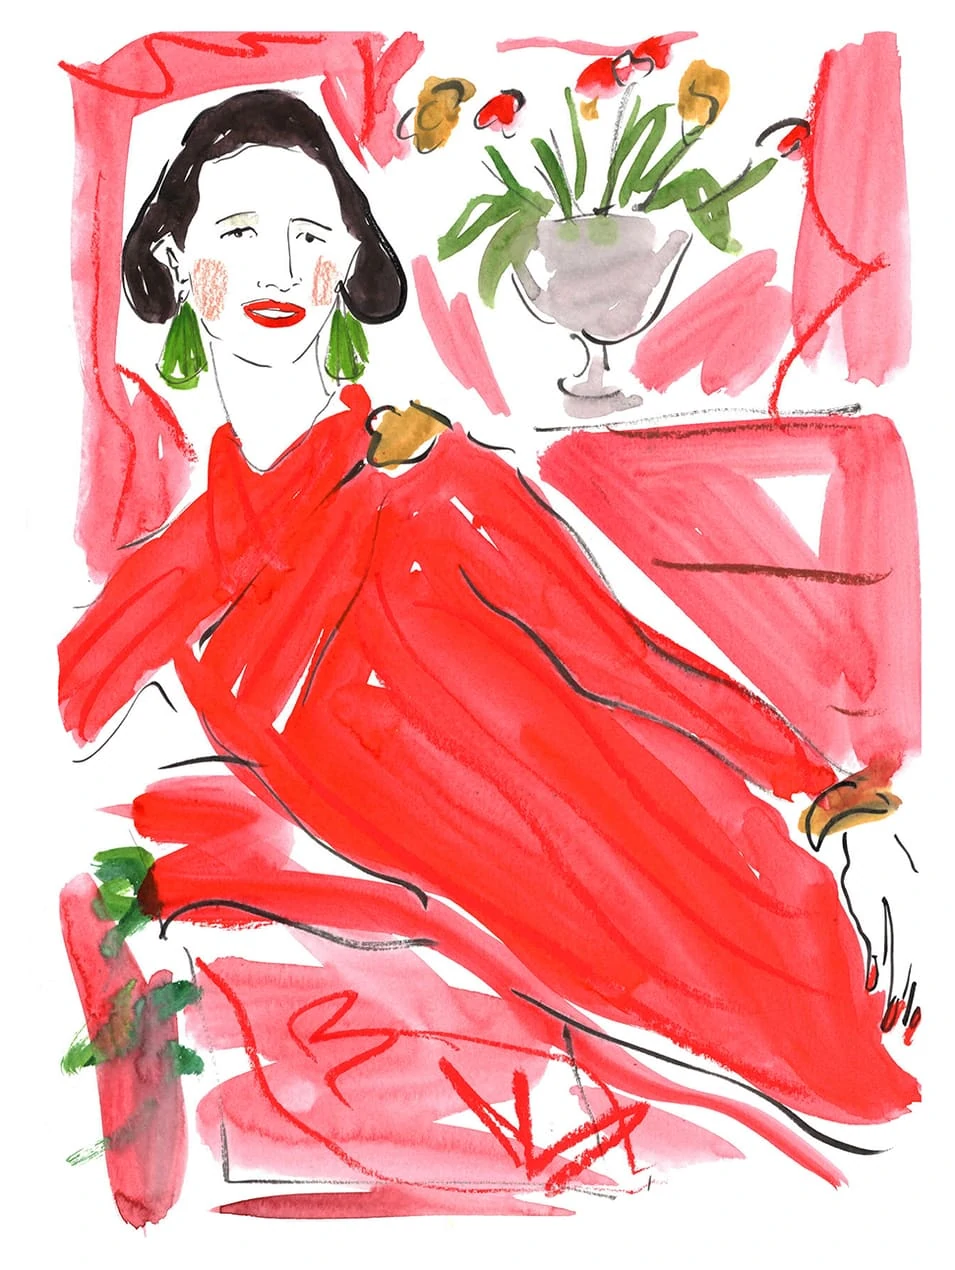 An illustration of Diana Vreeland by Luke Edward Hall, taken from a new book about the fashion editor, Bon Mots